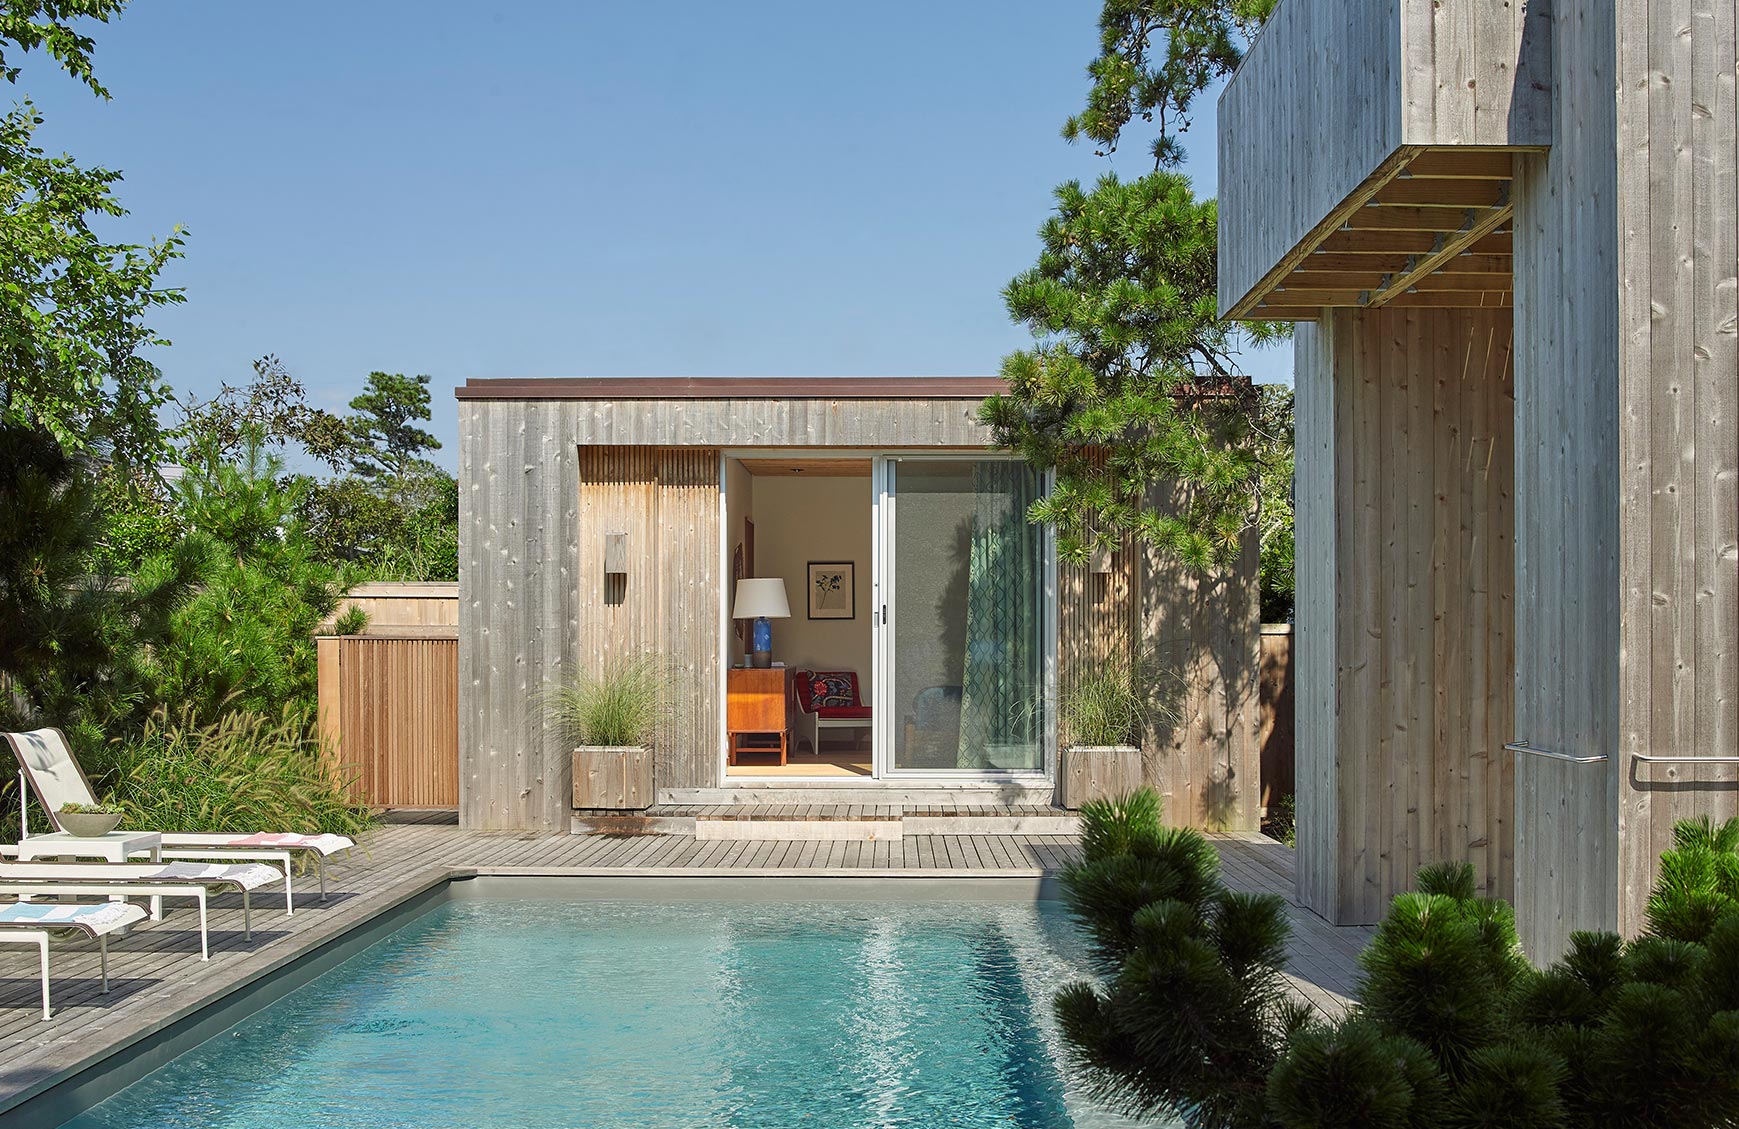 Fire Island House, Long Island, NY - A restoration, renovation, and addition to a 1965 house by modern architect Horace Gifford.